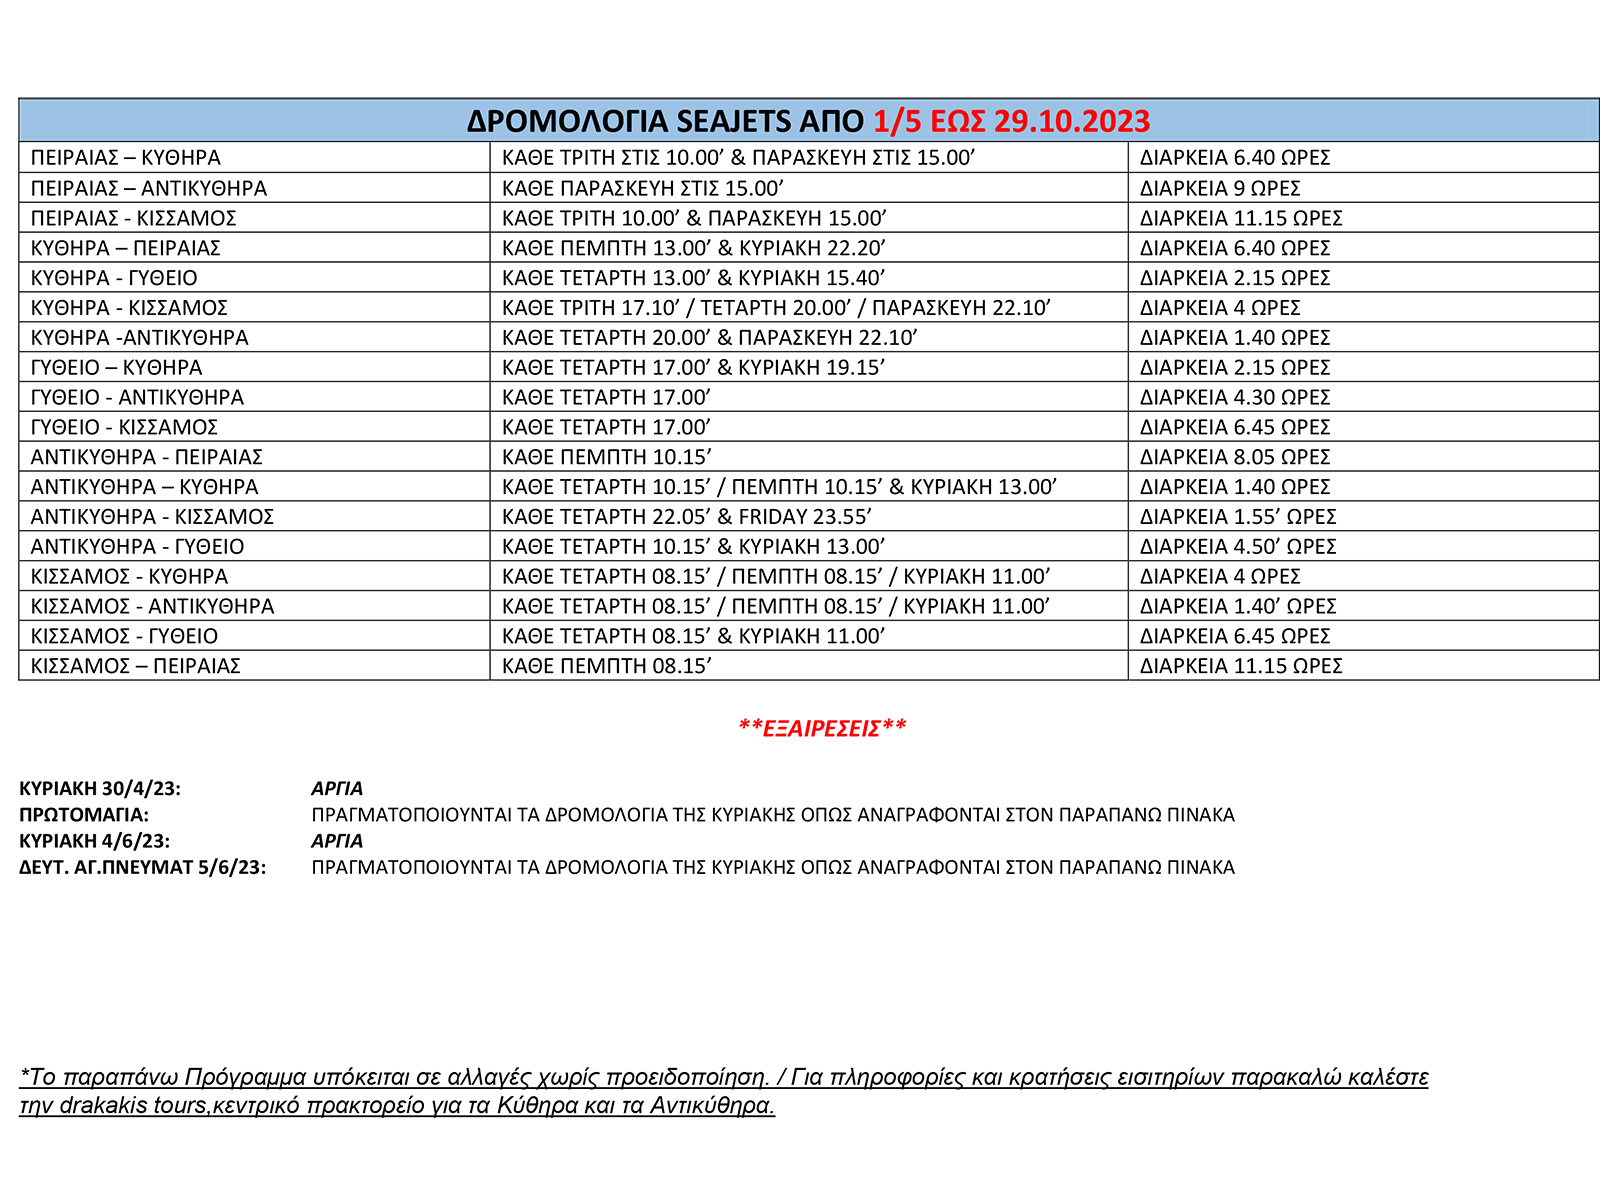 AQUA JEWEL STE SCHEDULE GREEK 1ST MAY TO OCTOBER 29TH